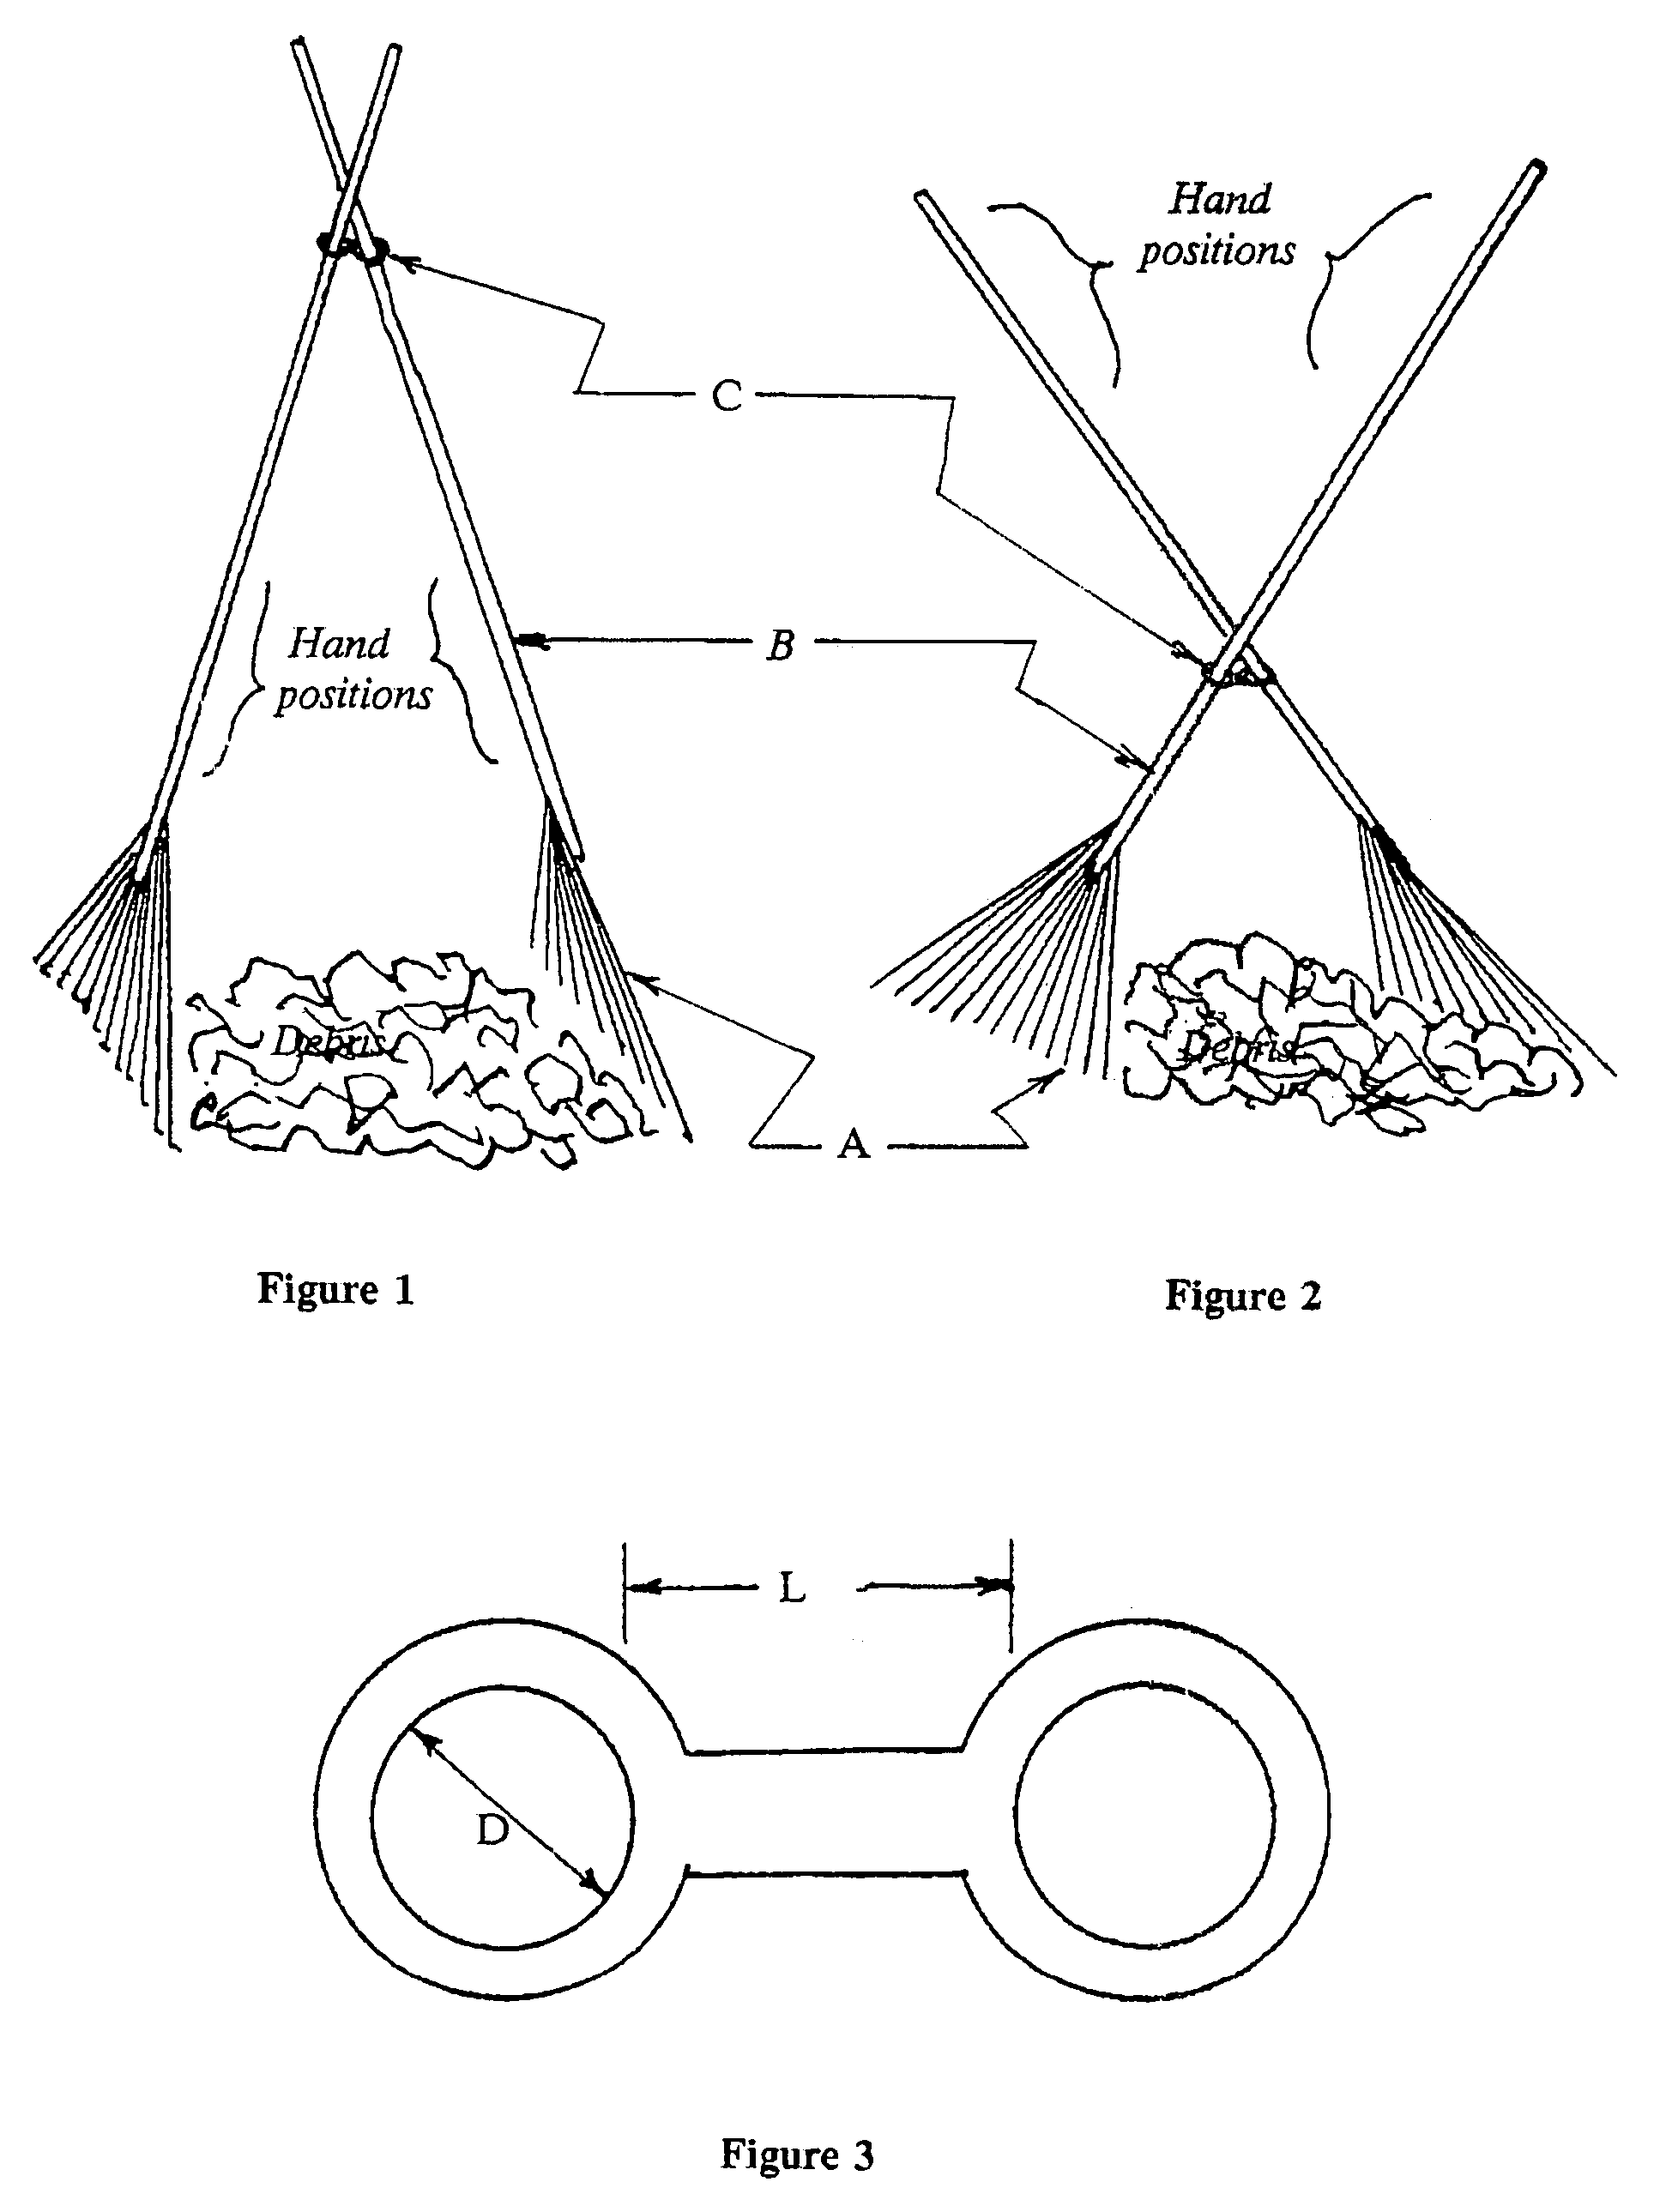 Apparatus for gathering, picking up and carrying loose materials